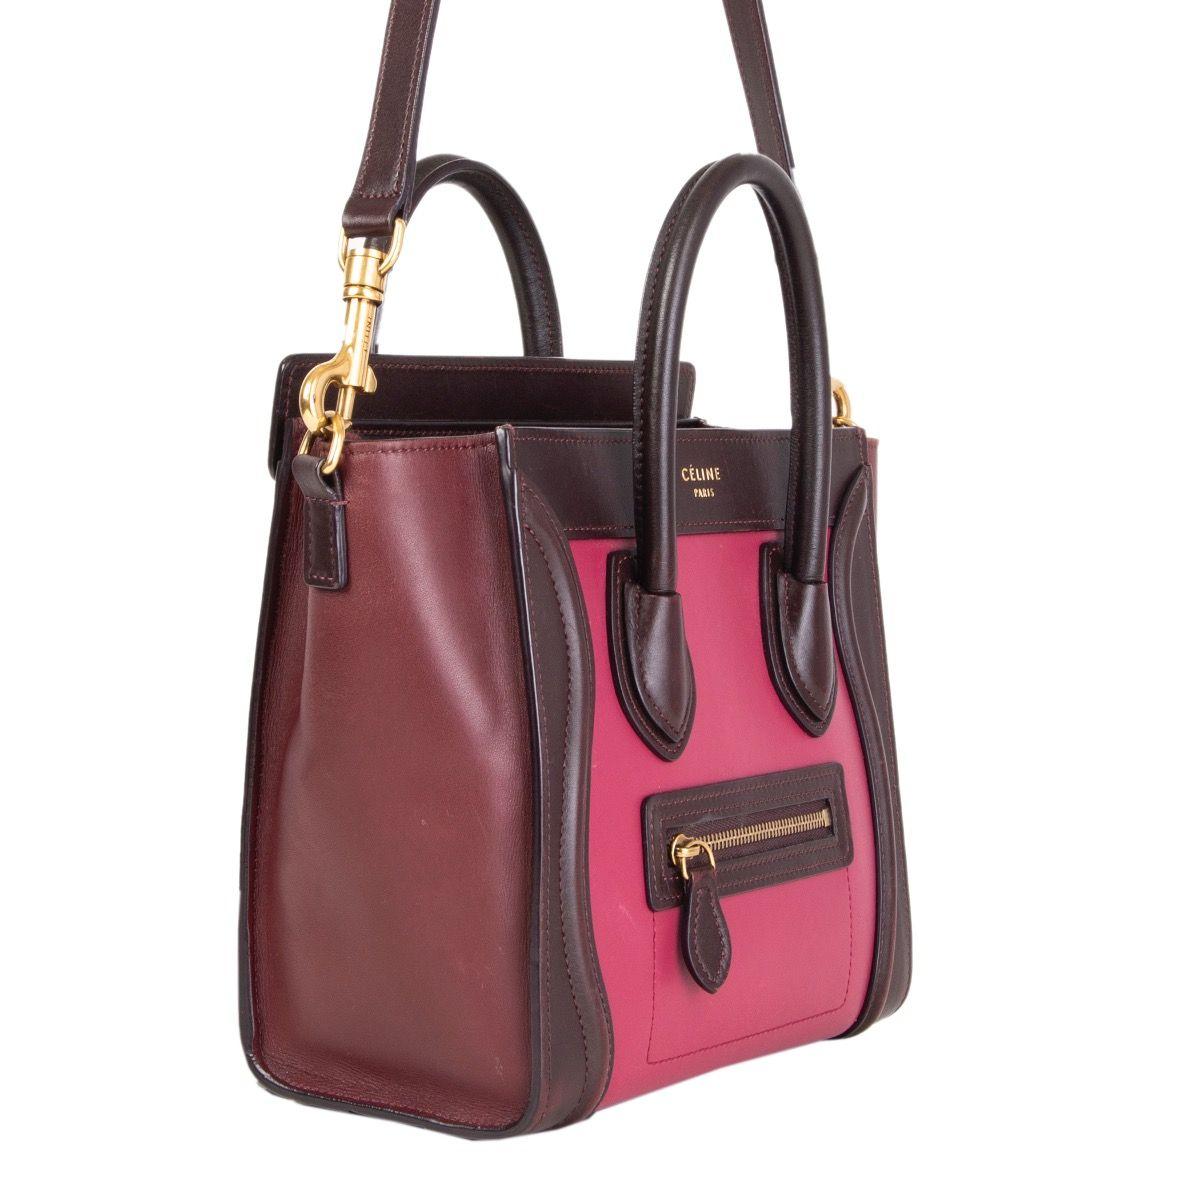 100% authentic Céline 'Nano Luggage' cross body tote bag in magenta, maroon and burgundy calfskin featuring zipped outside pocket. Opens with a zipper on top and is lined in maroon calfskin with one open pocket against the back. Detachable shoulder